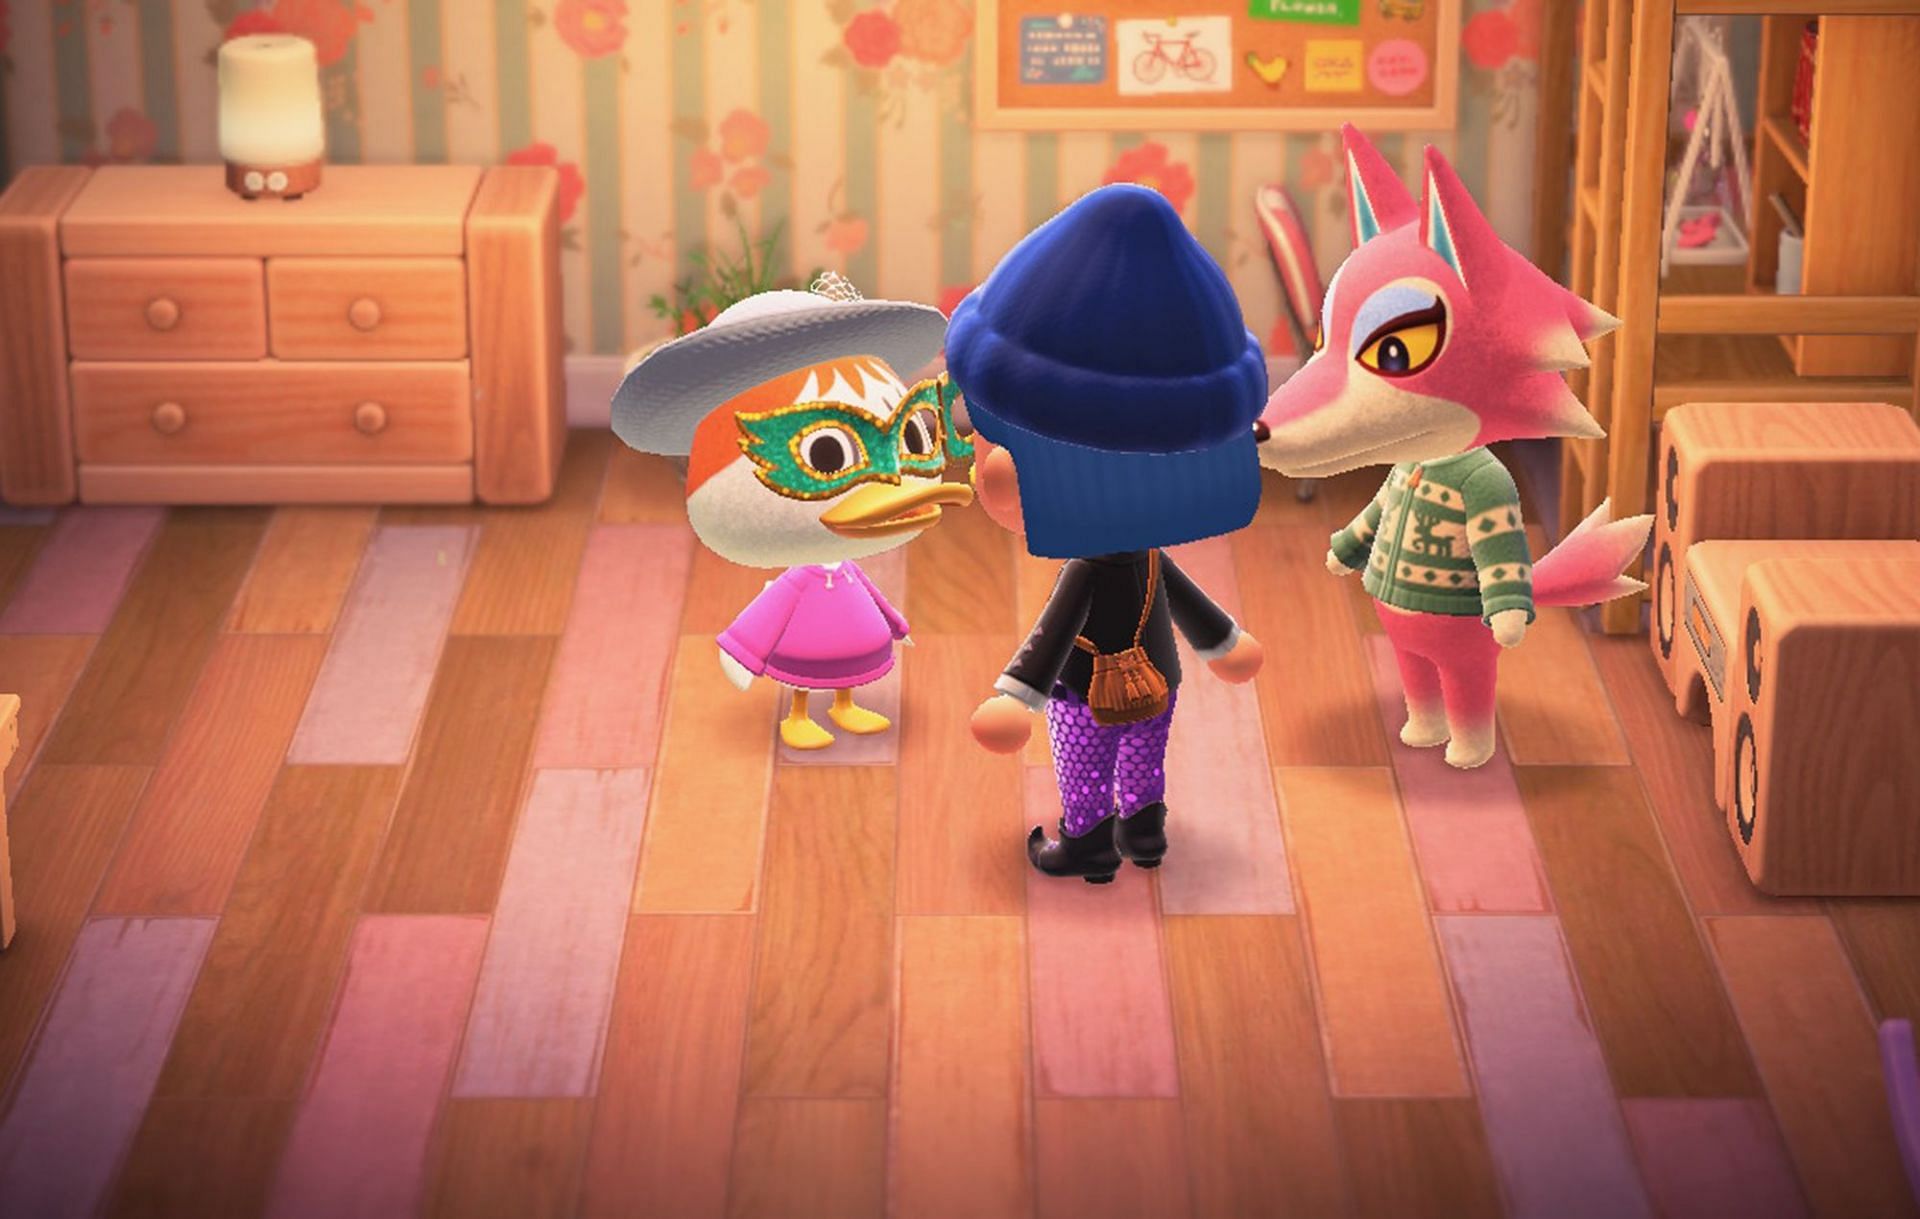 Animal Crossing: New Horizons players are really annoyed by unannounced villager visits (Image via NME)